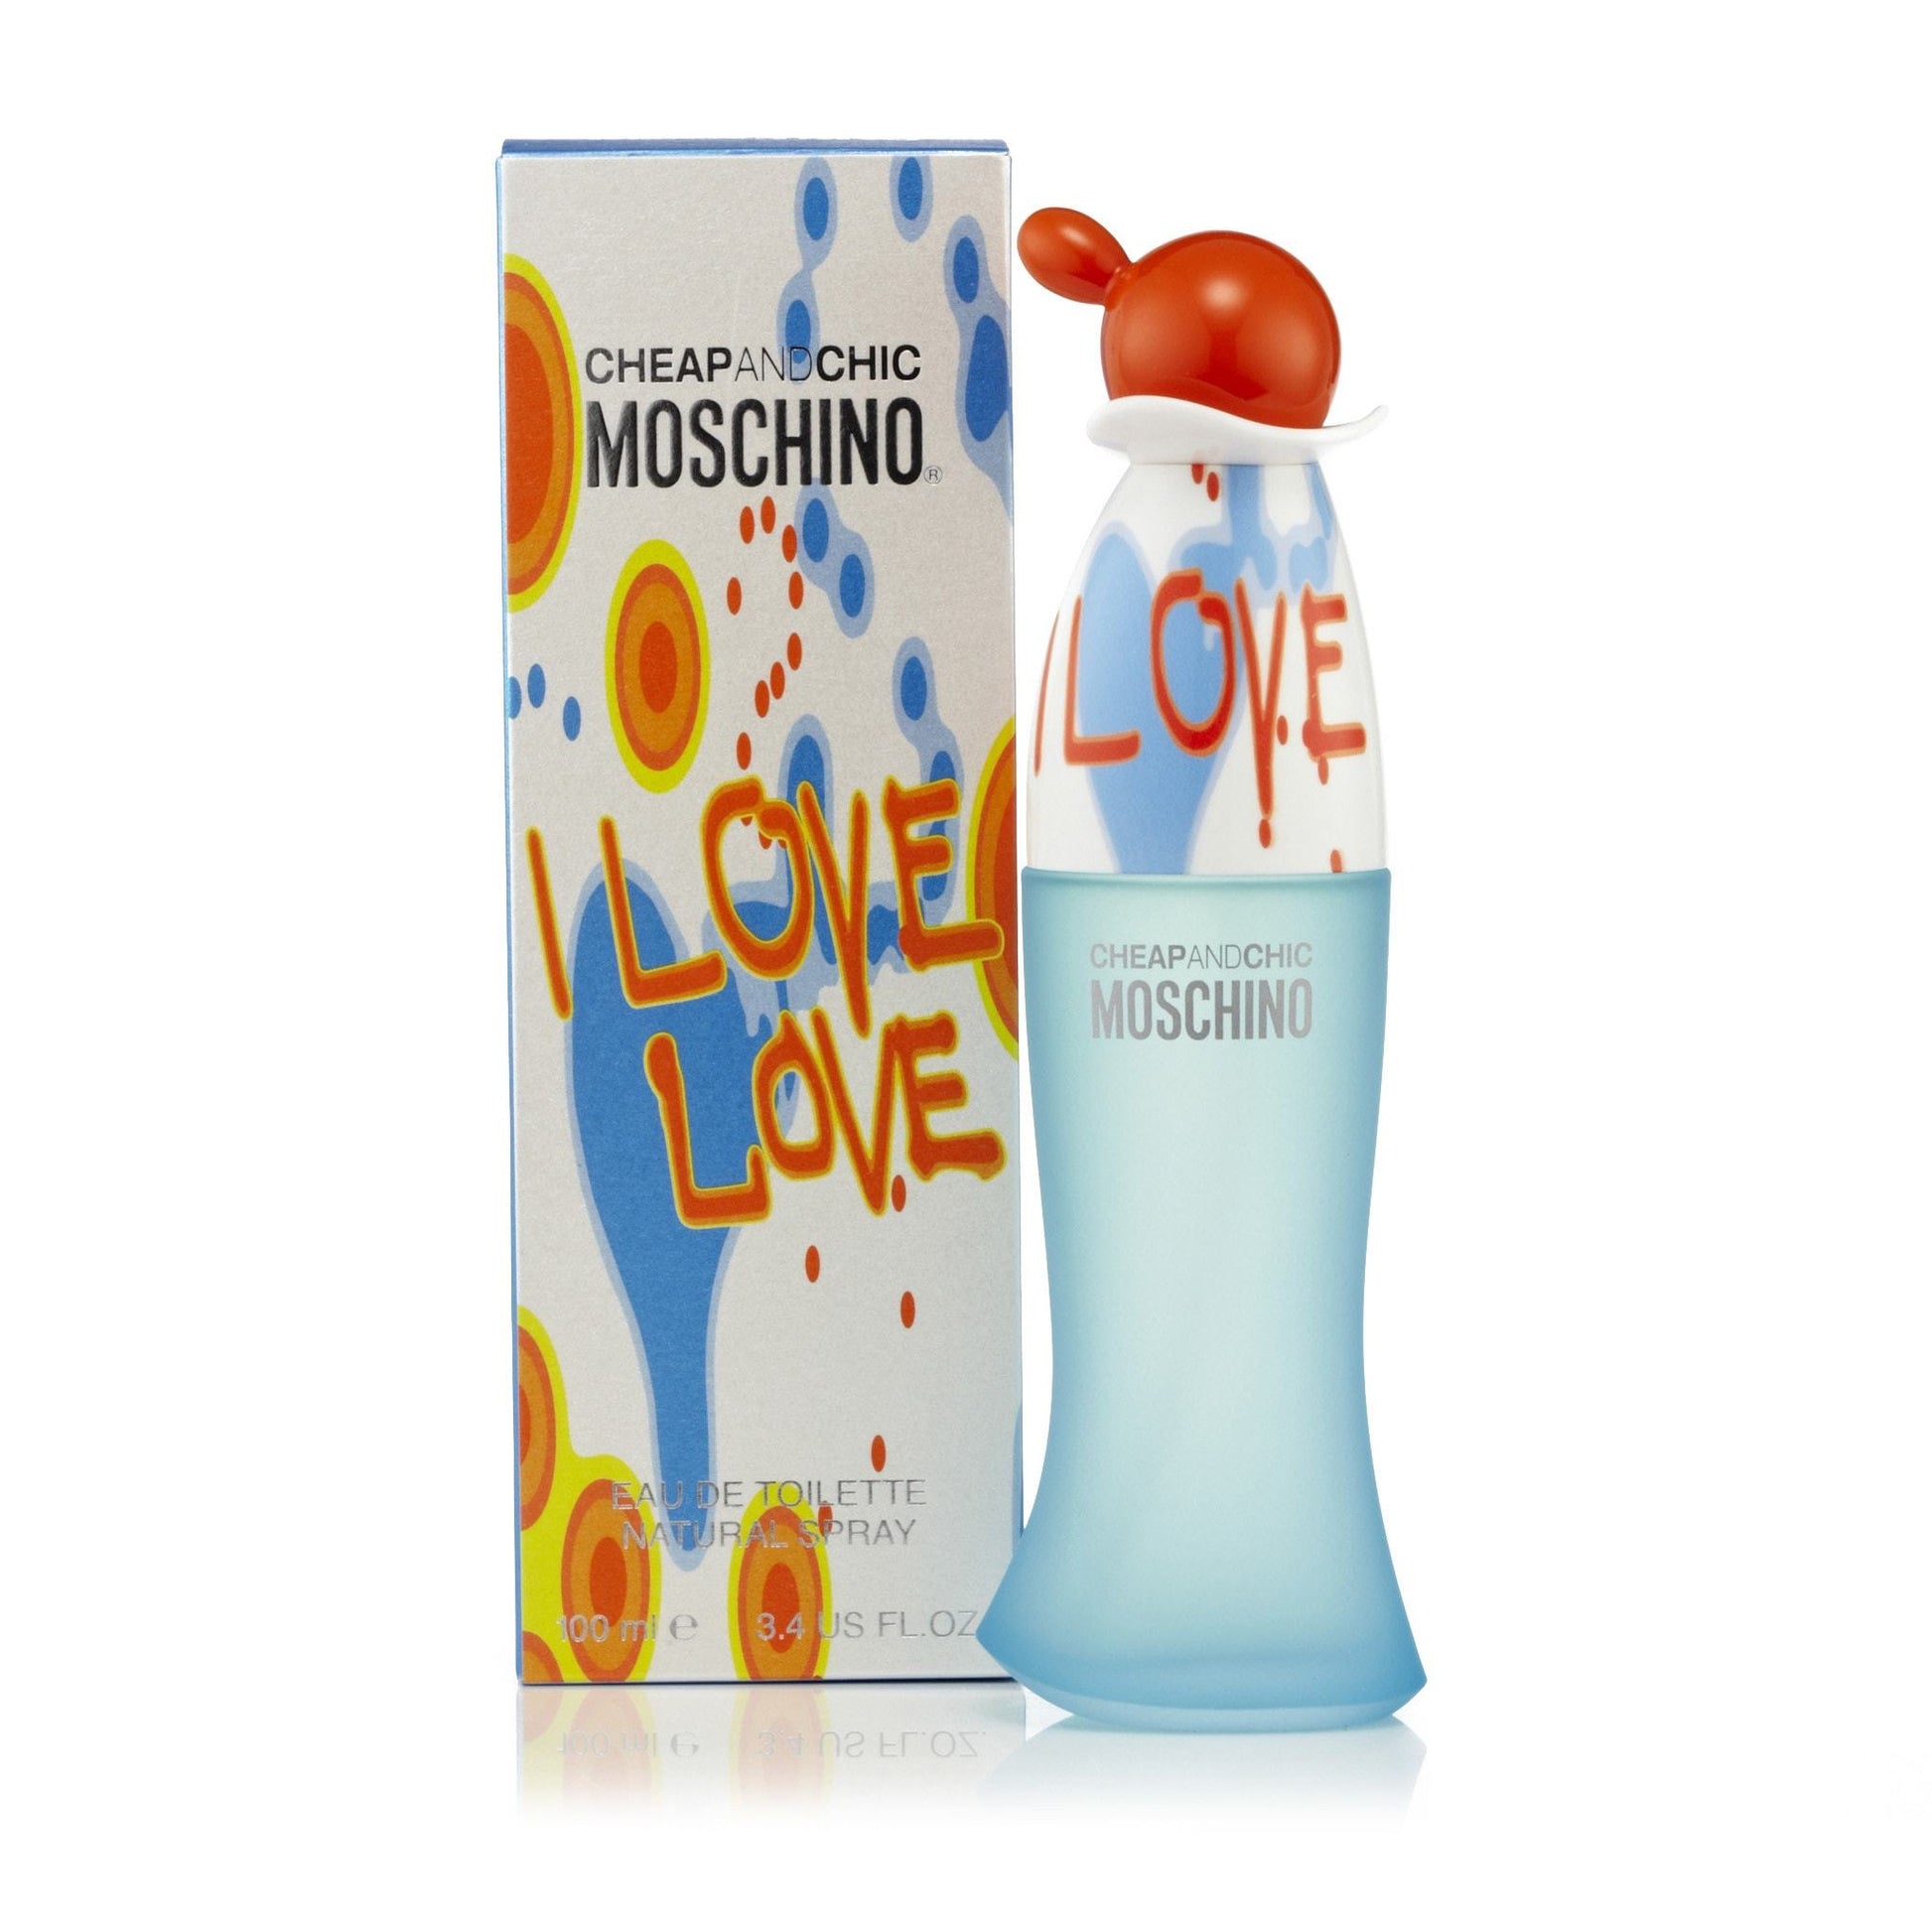 I Love Love Eau de Toilette Spray for Women by Moschino, Product image 6